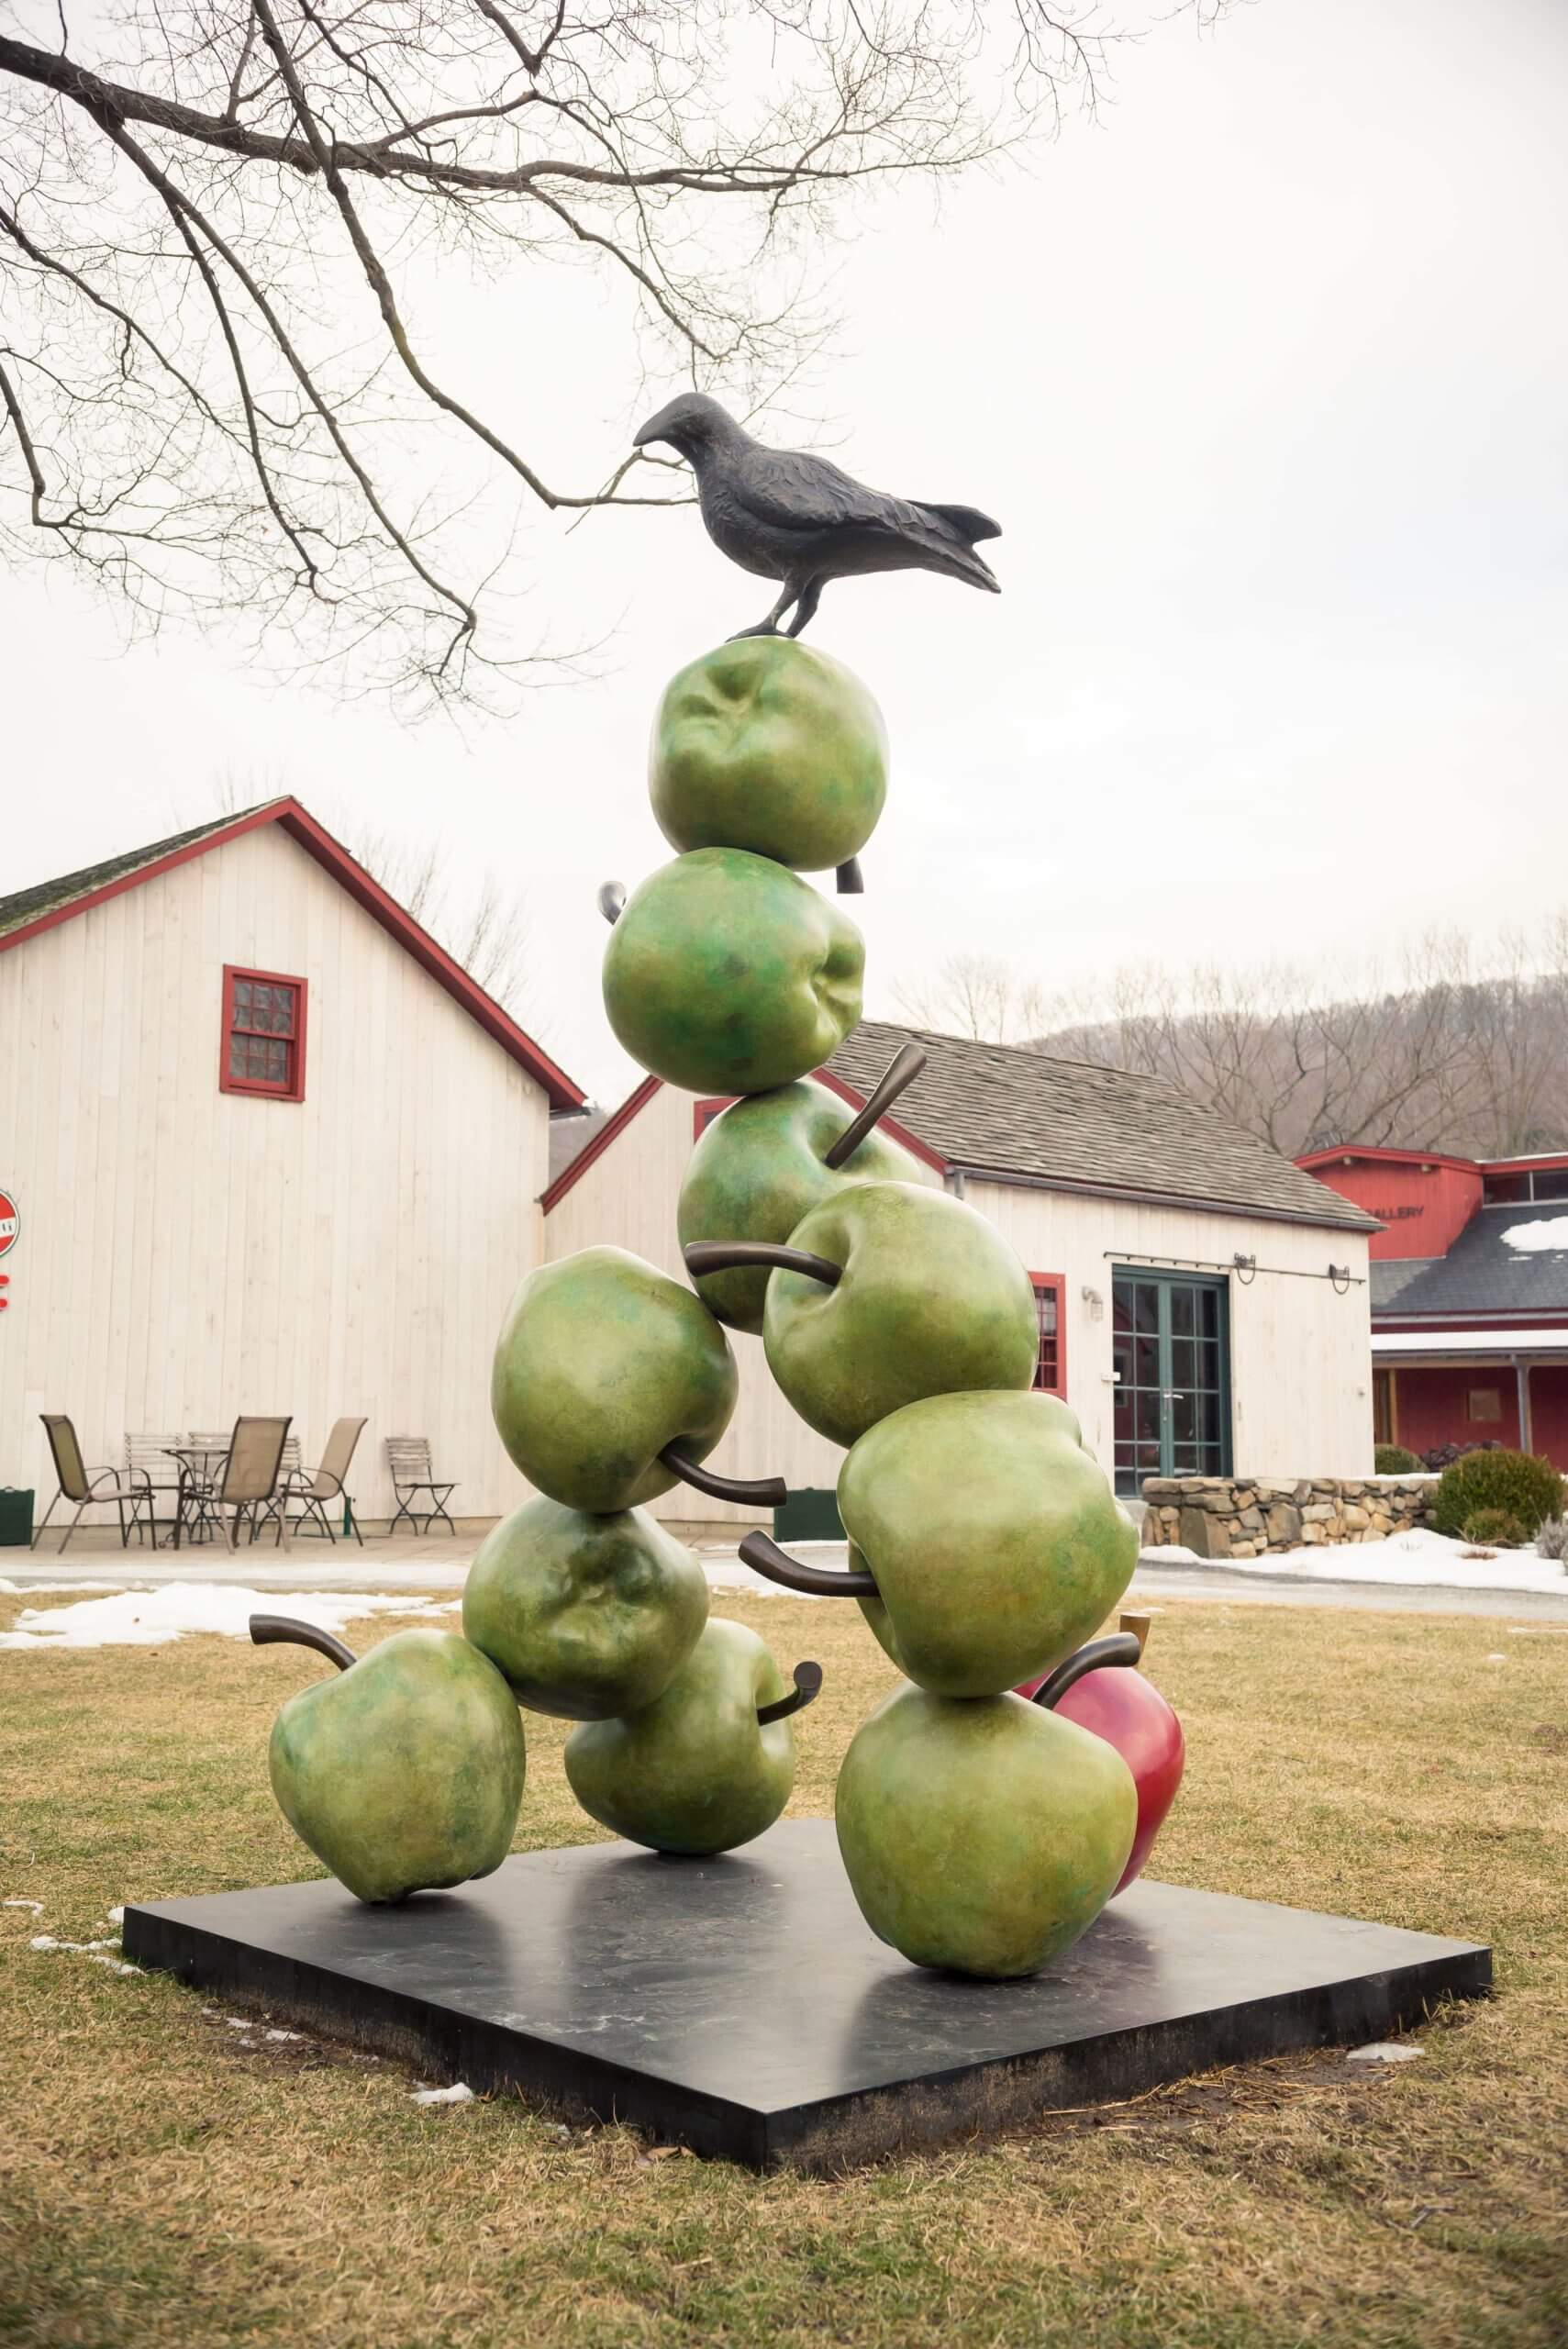 A statue of a blackbird on top of a narrow stack of apples outside on the lawn of a nearby building.